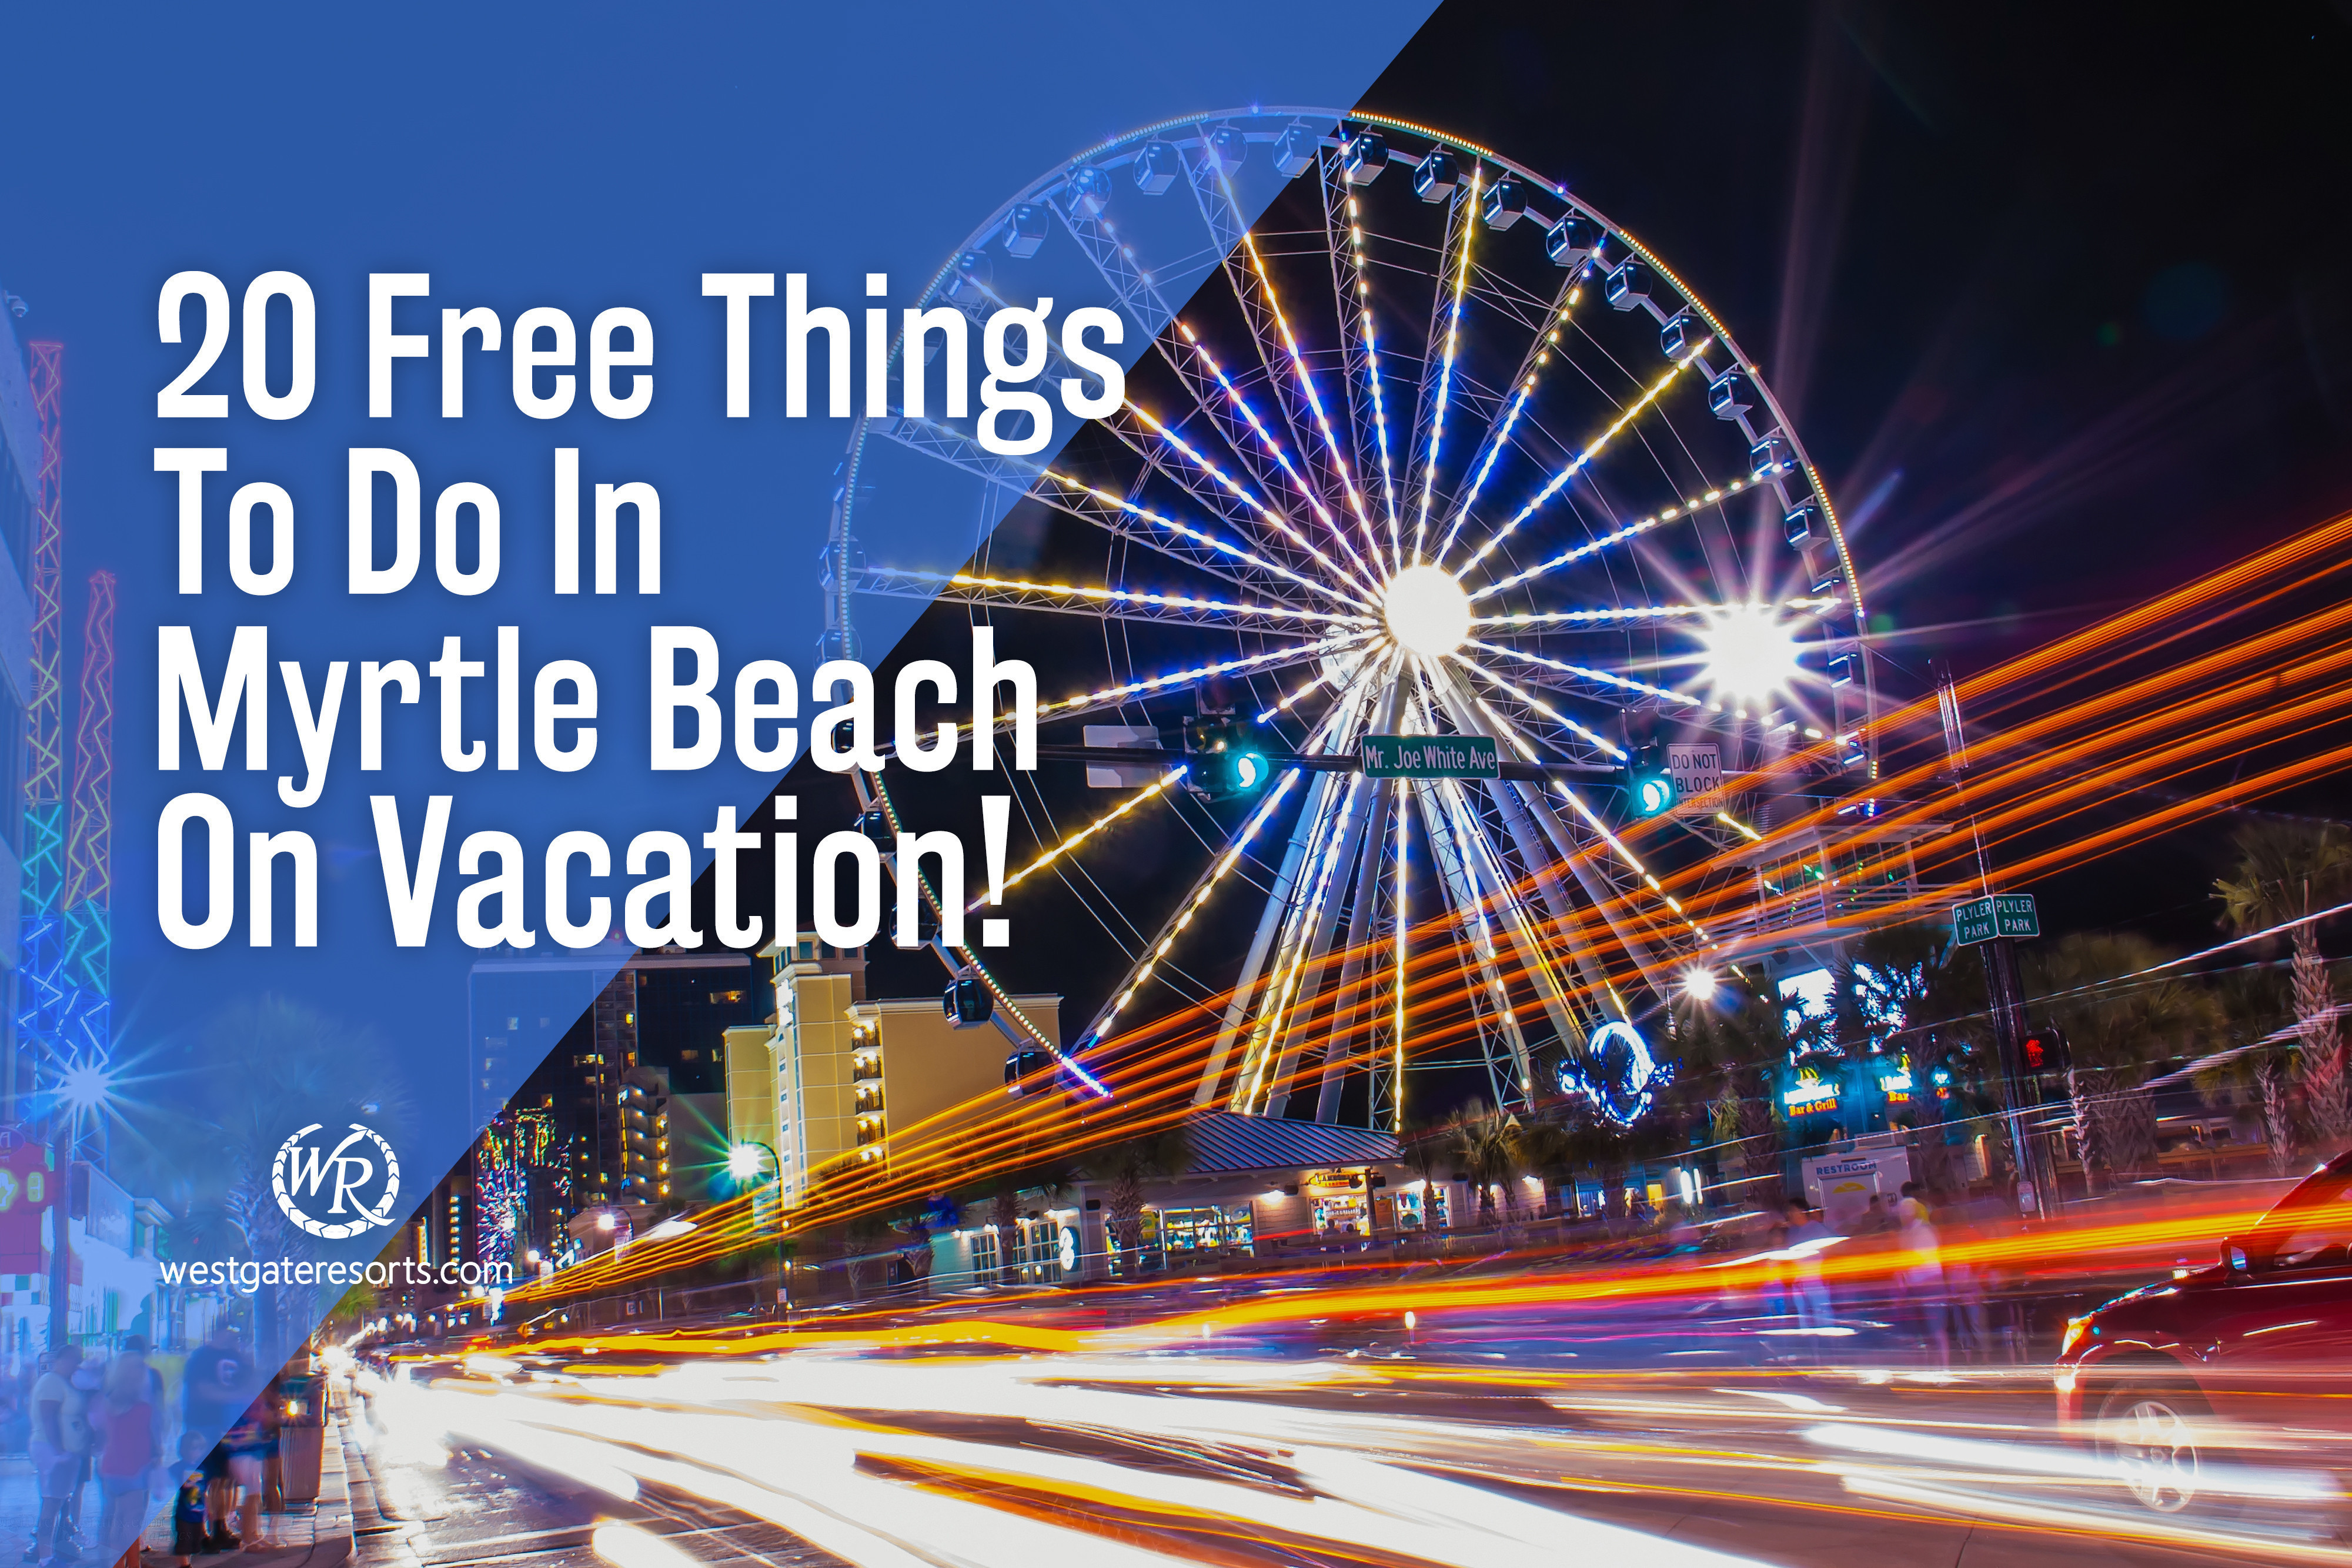 20 Free Things To Do In Myrtle Beach On Vacation | Free Activities In Myrtle Beach